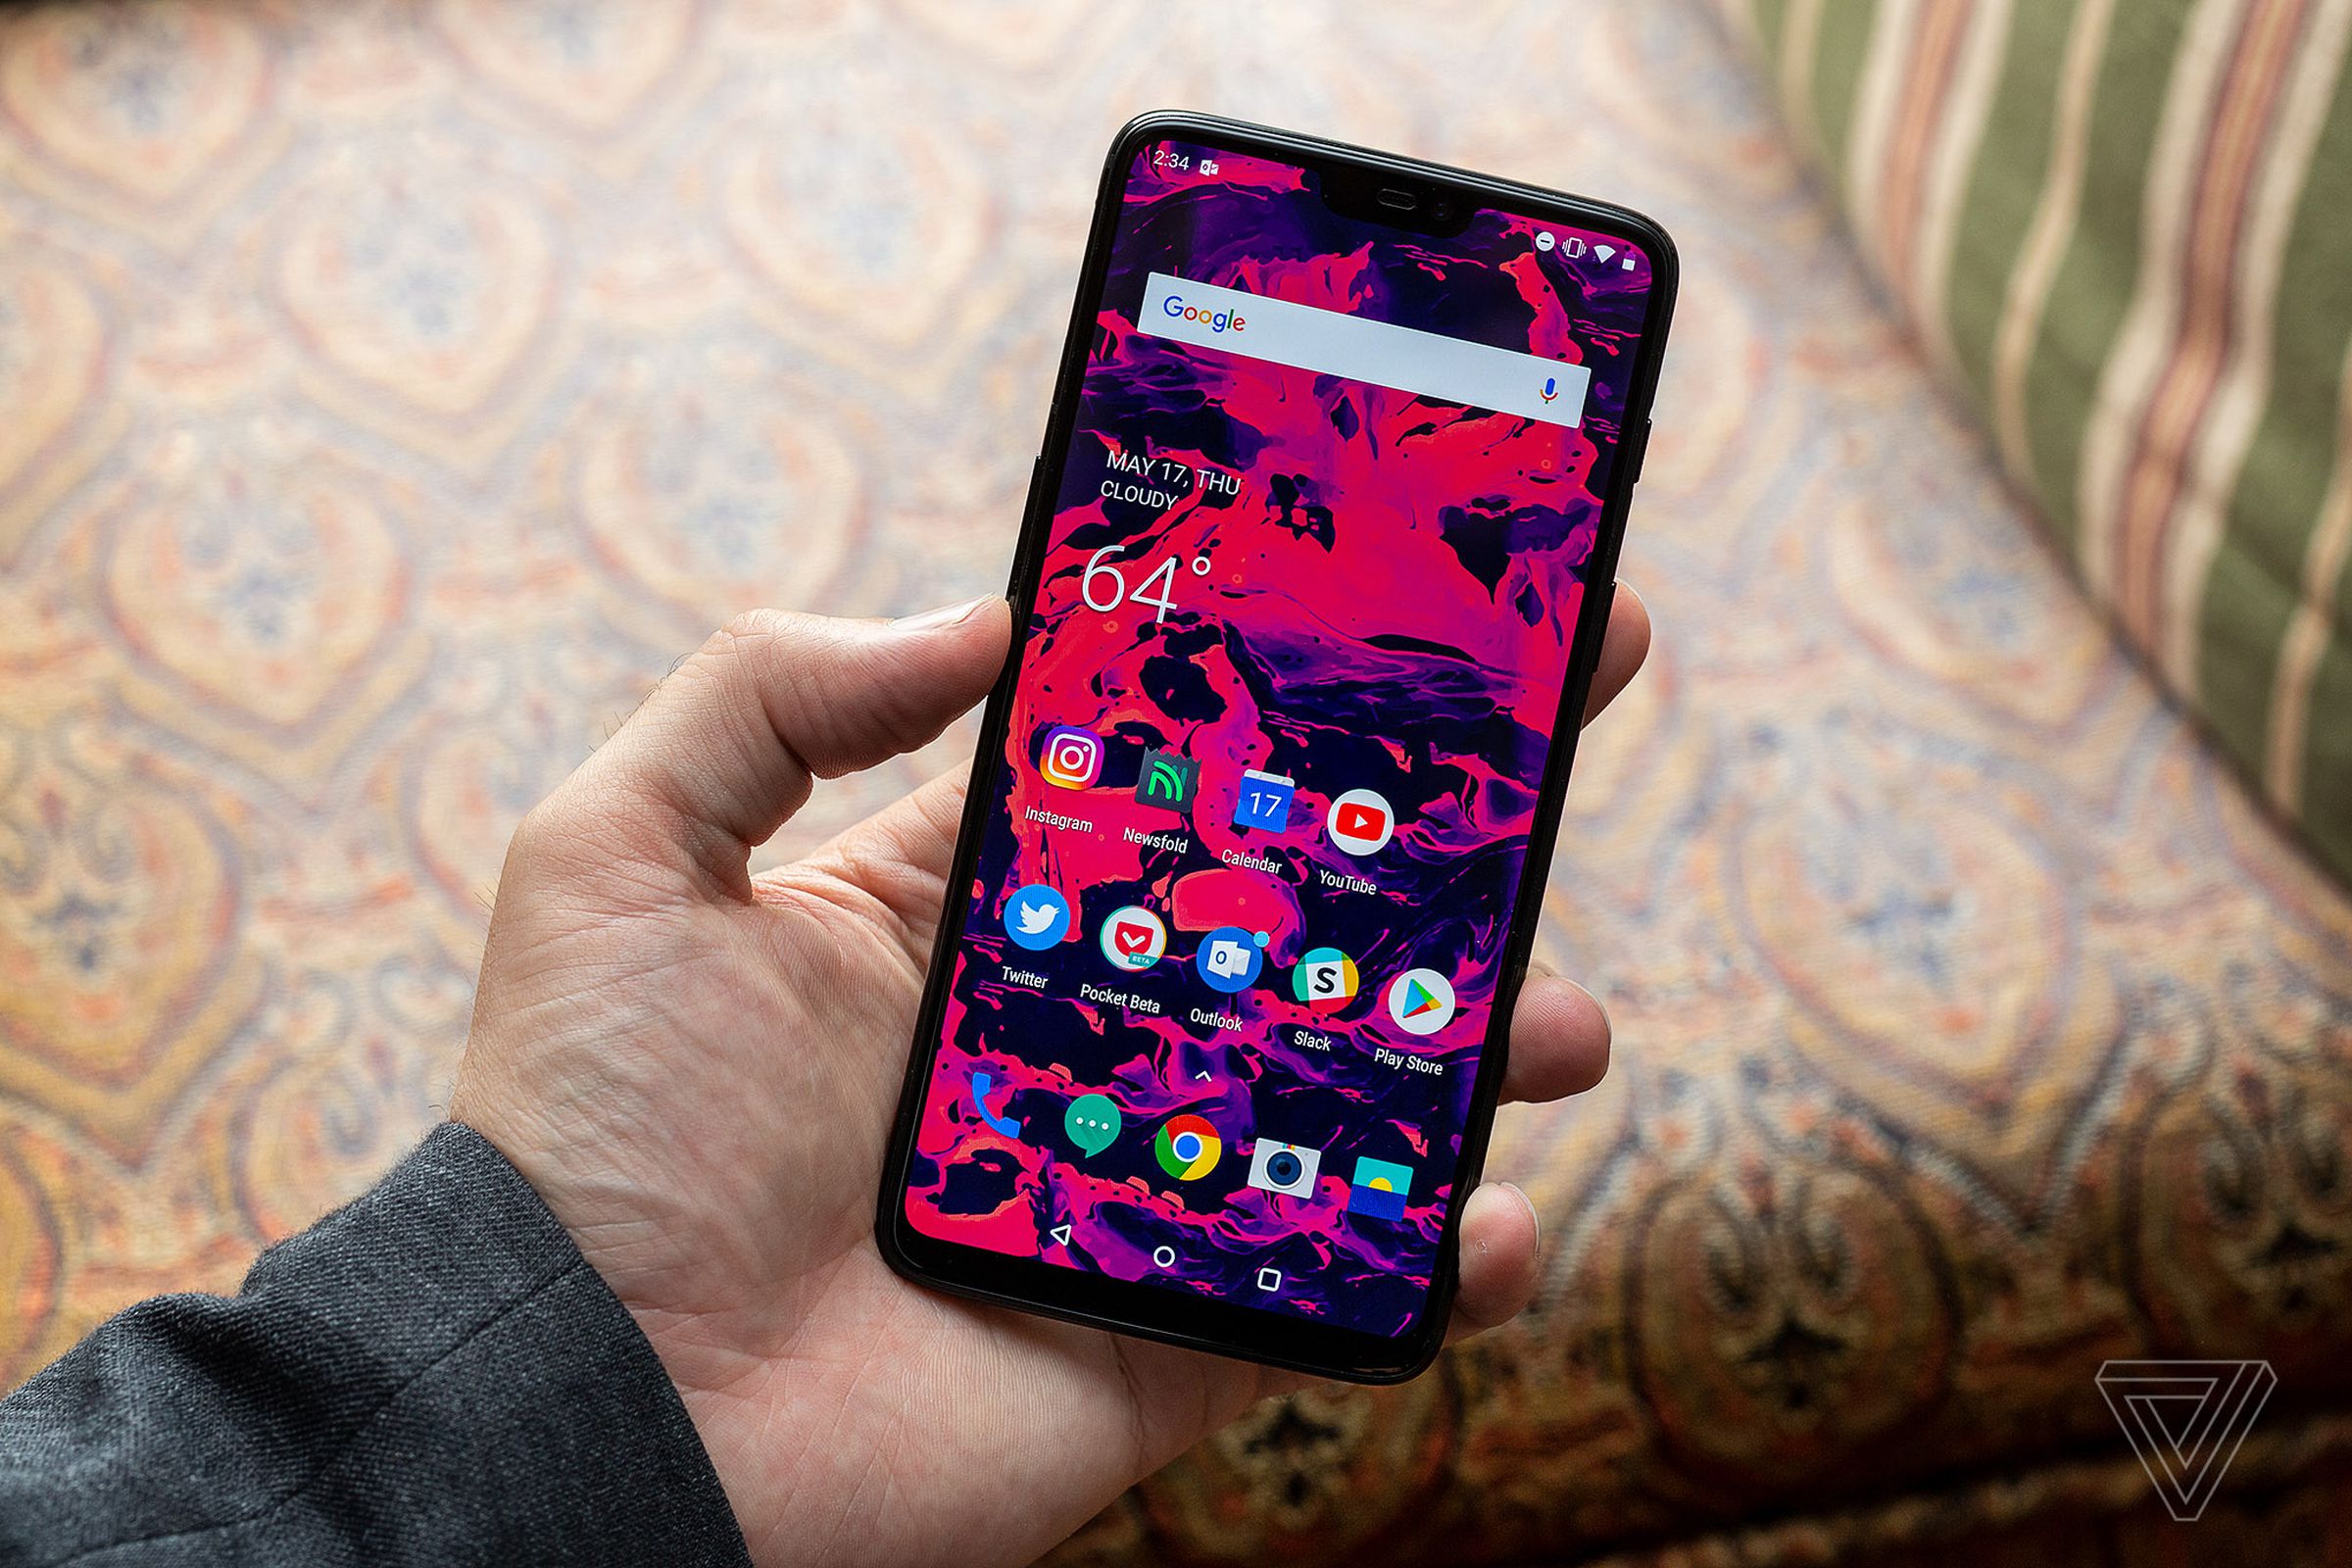 In usual OnePlus tradition, the OnePlus 6 released earlier this year (above) will soon be succeeded.